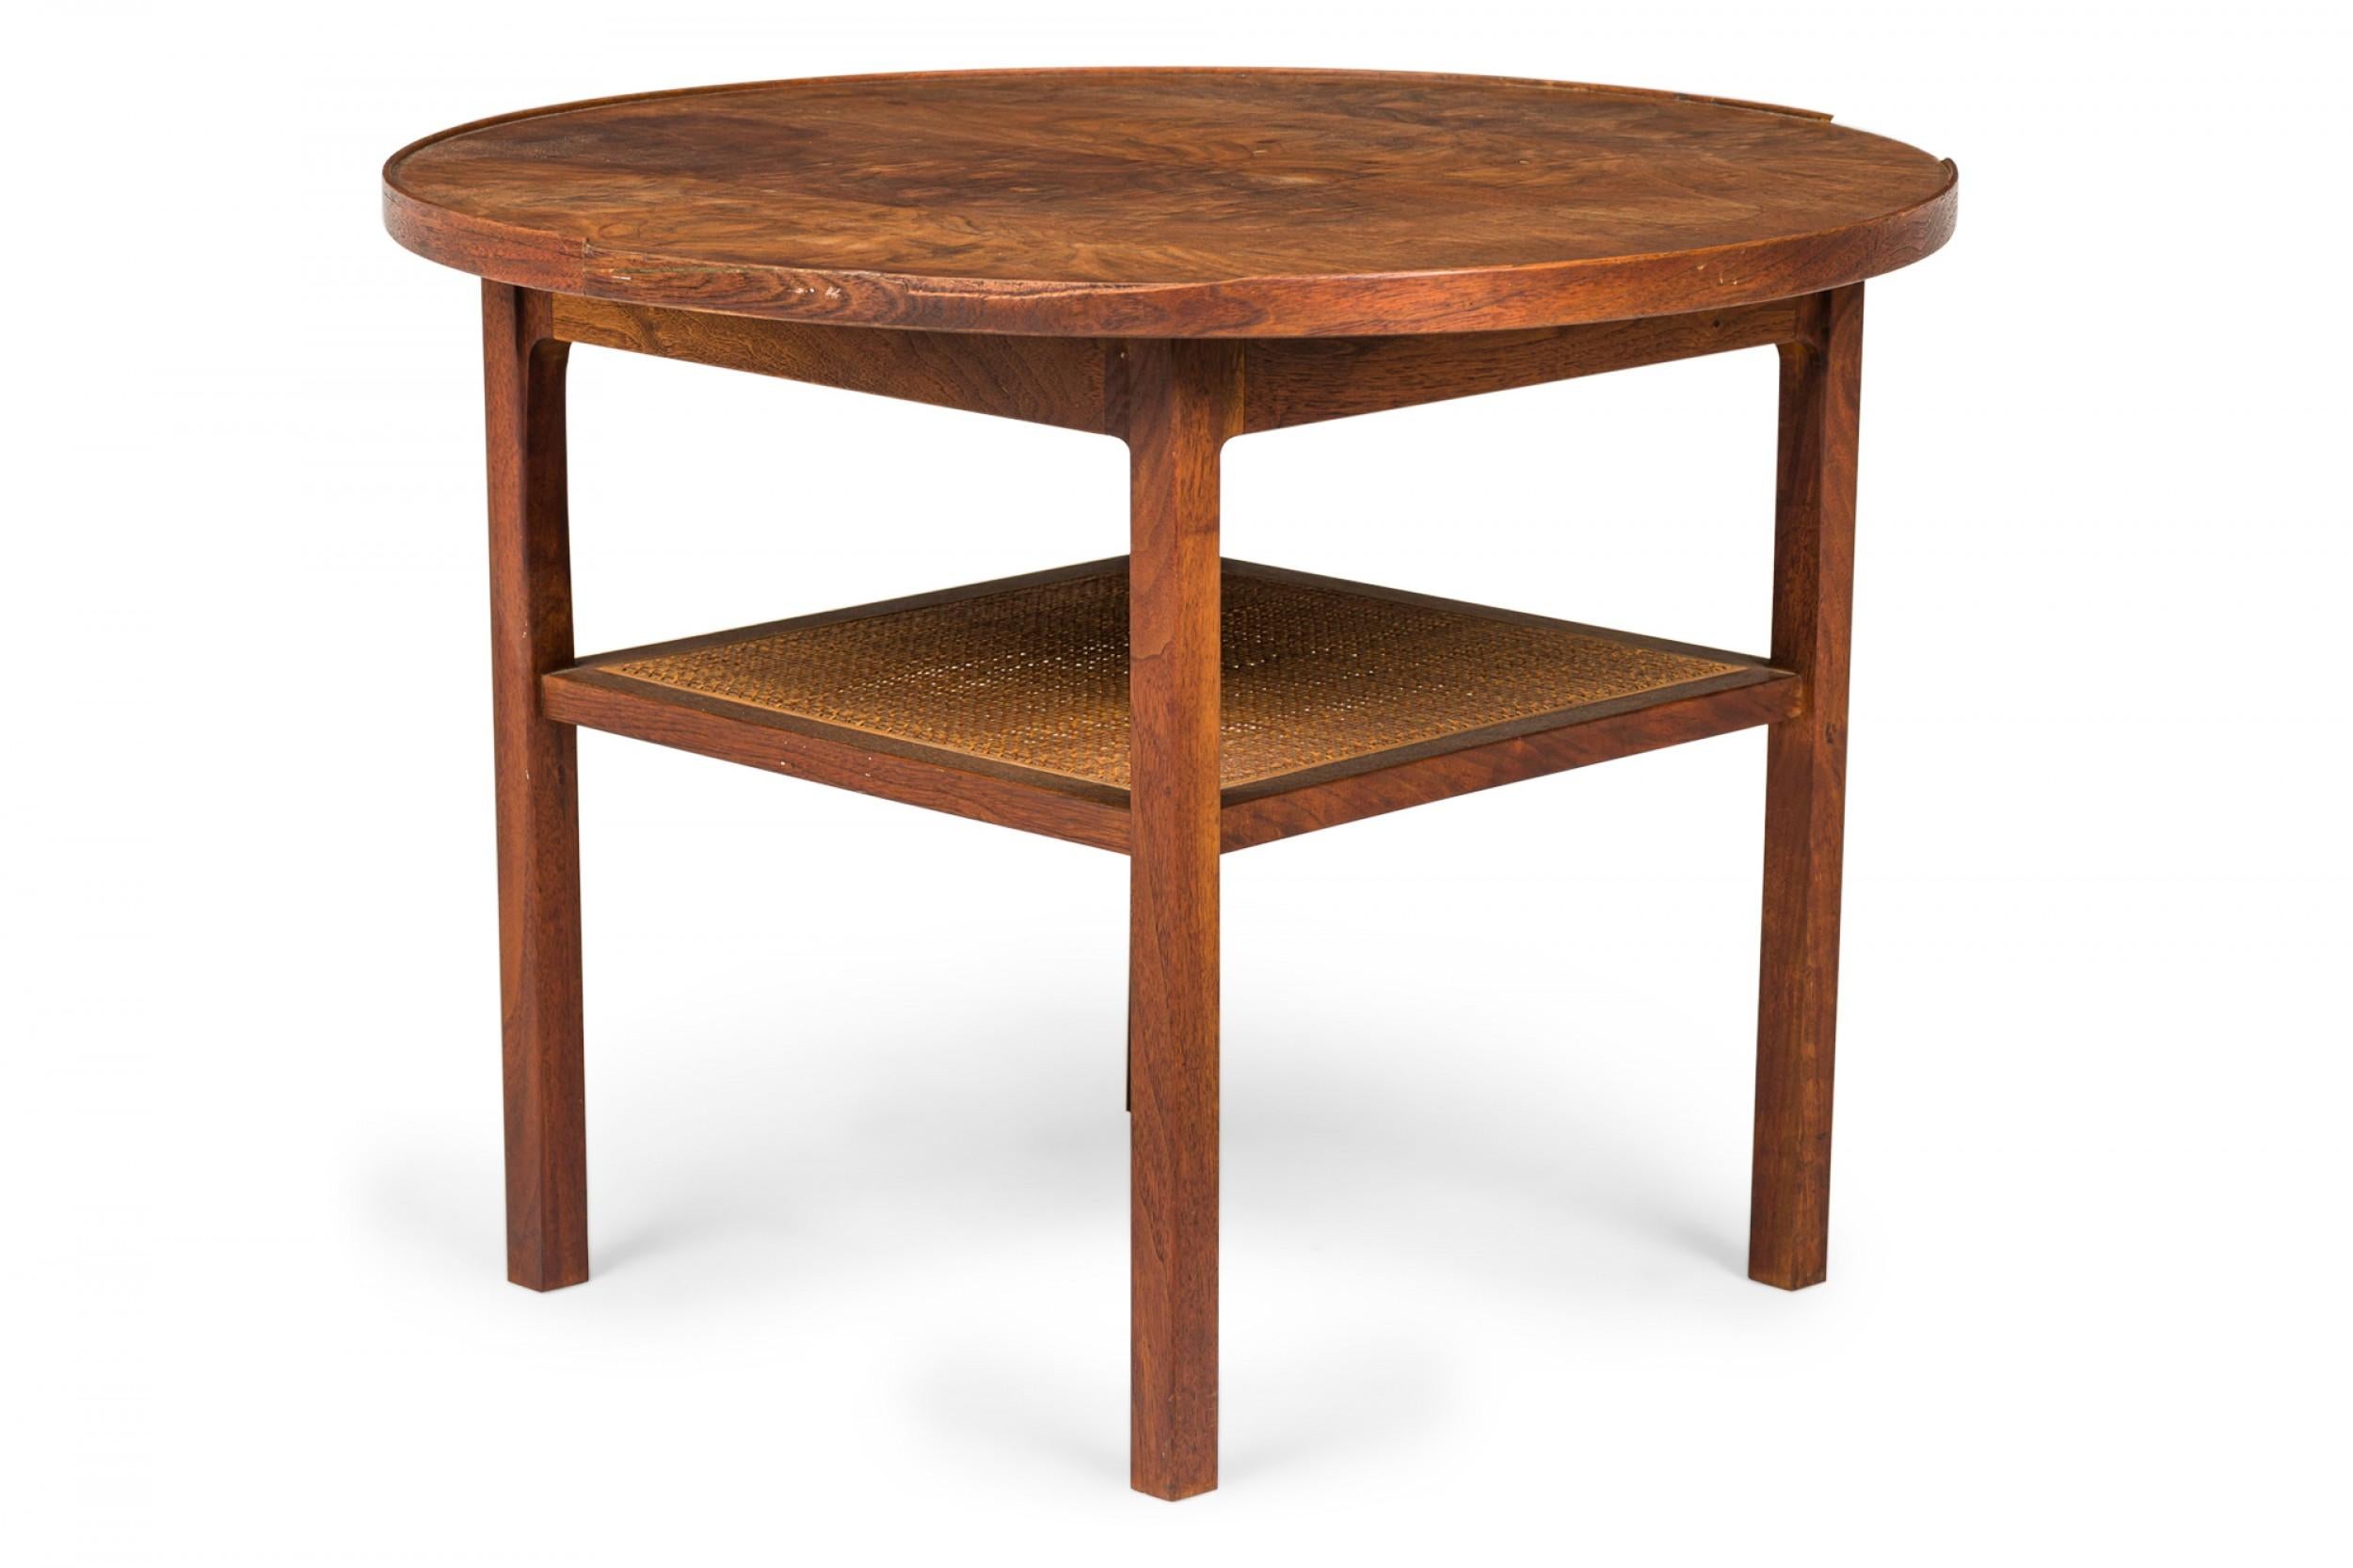 American Mid-Century end / side table with a circular top, walnut frame, and square caned lower stretcher shelf, resting on four walnut dowel legs. (PAUL MCCOBB FOR CALVIN FURNITURE COMPANY)
